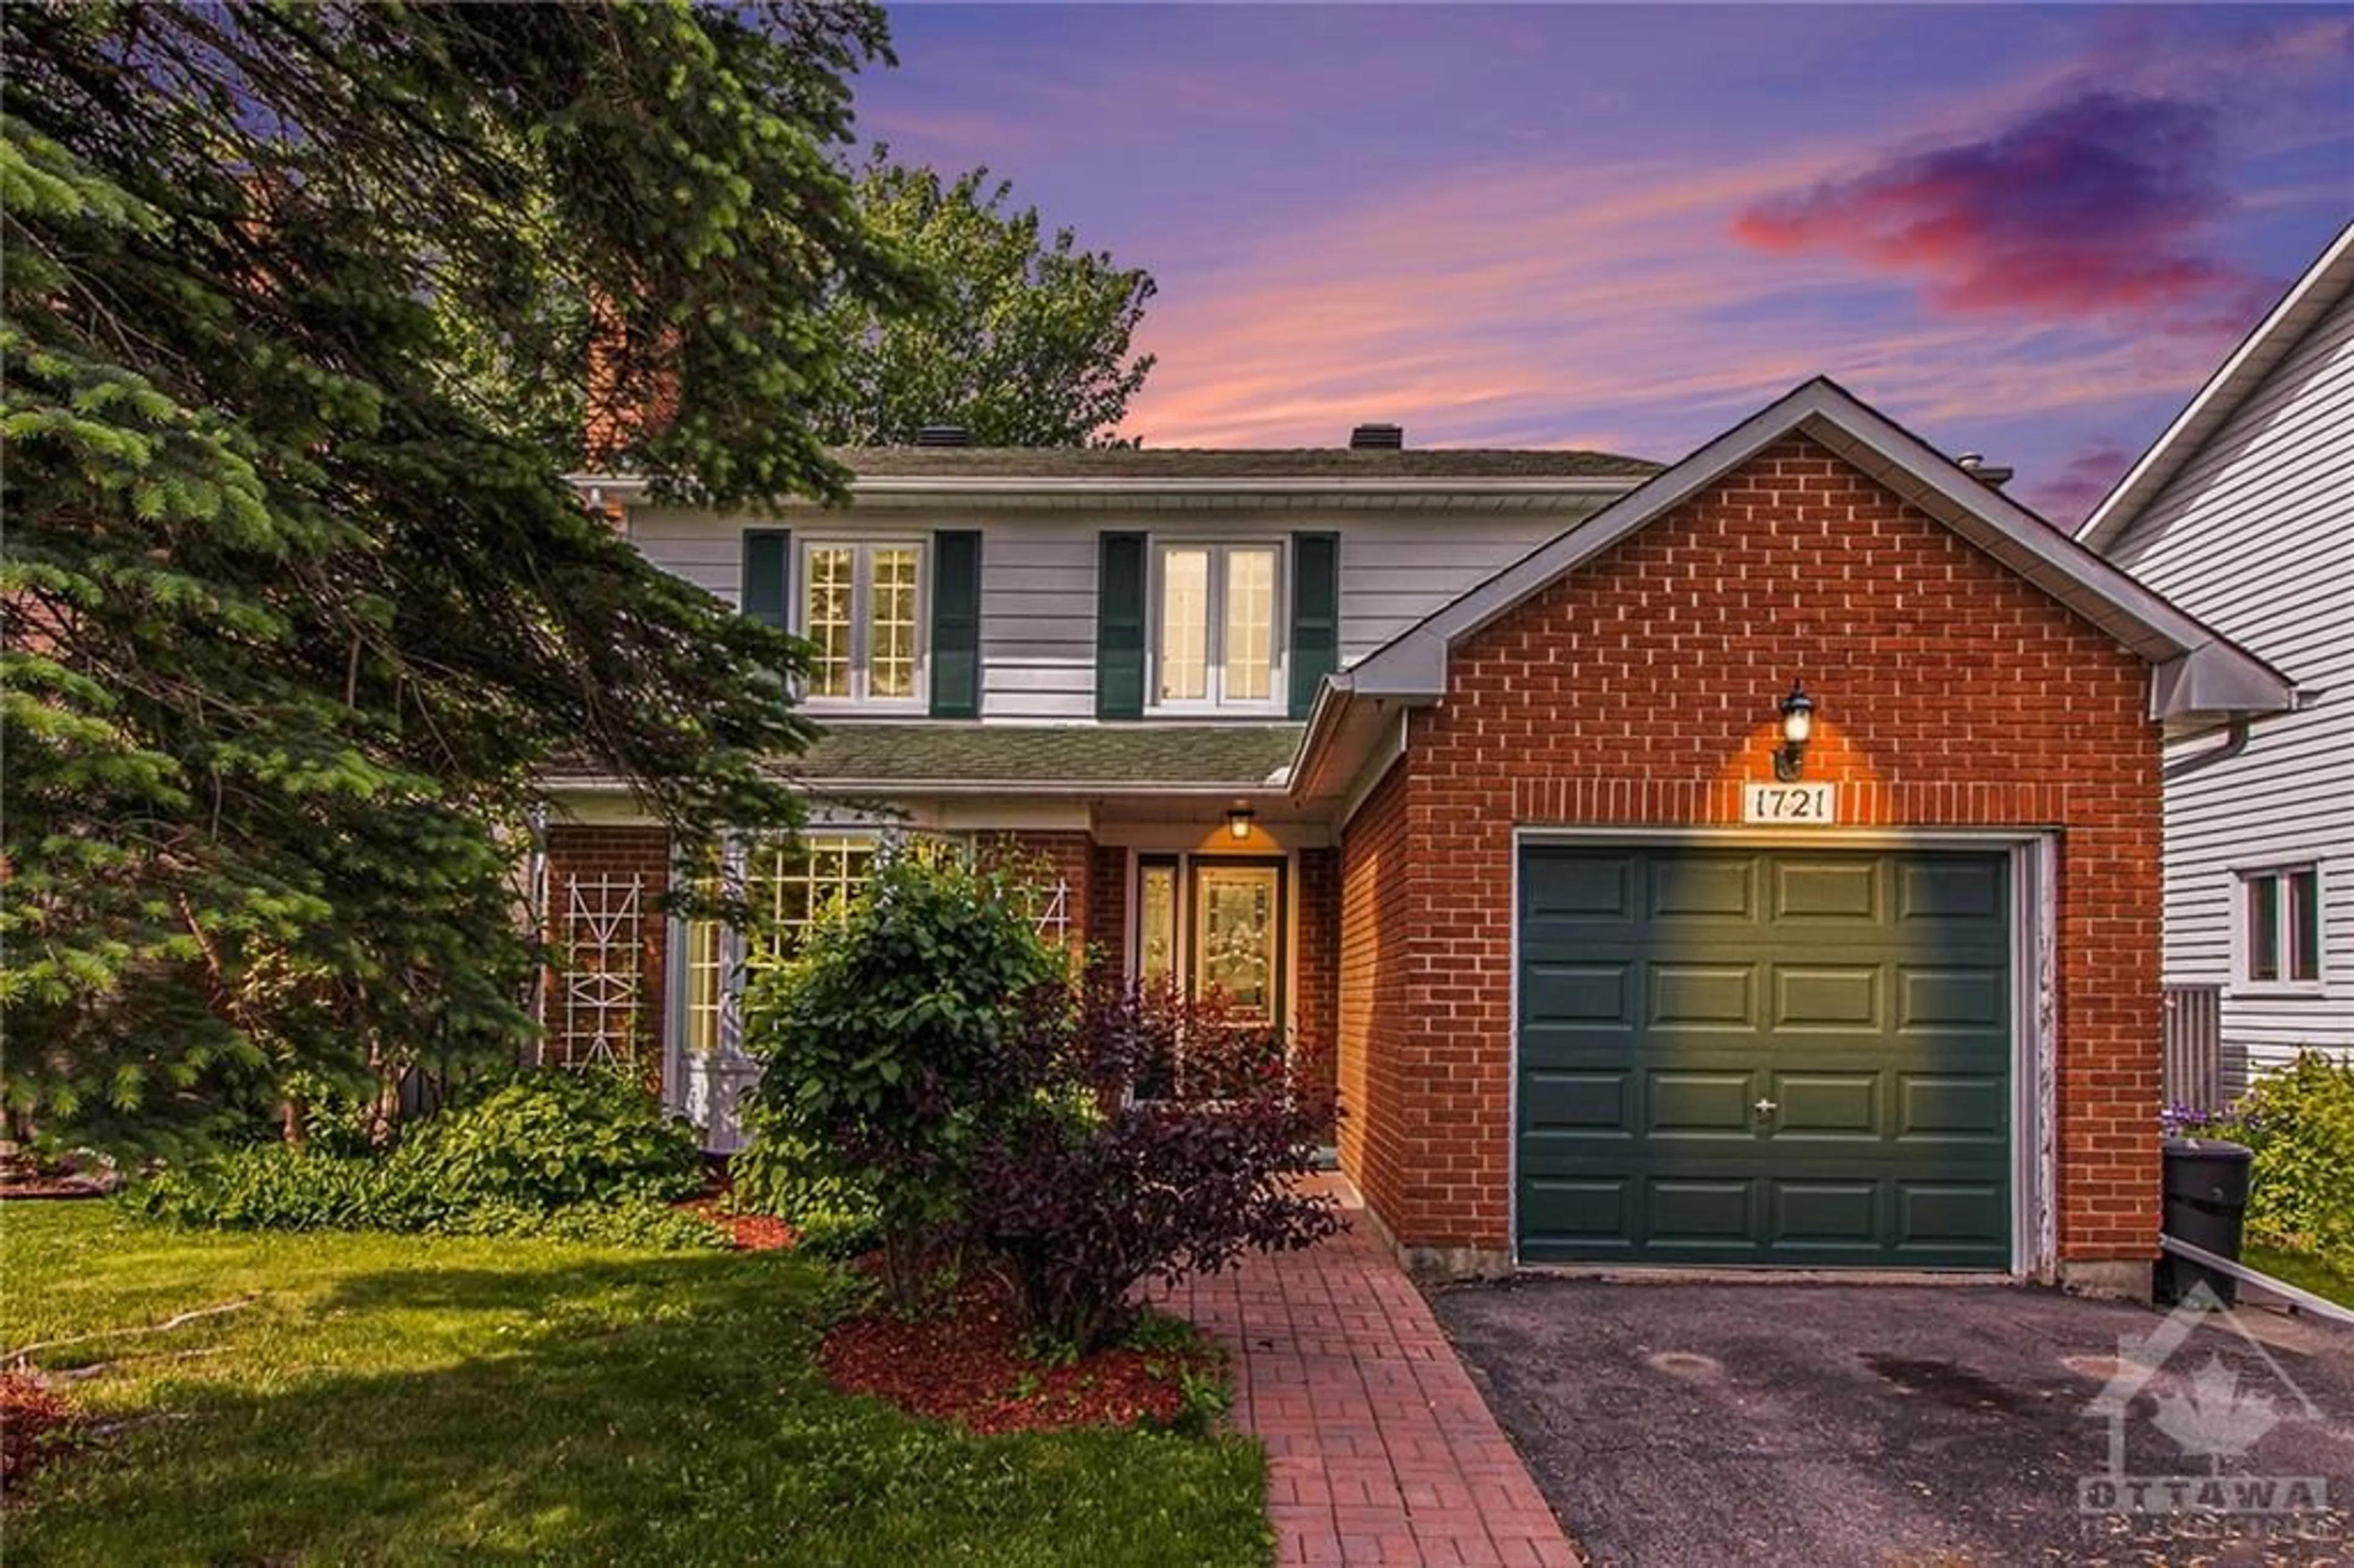 Home with brick exterior material for 1721 BONAVENTURE Terr, Orleans Ontario K1C 1W2